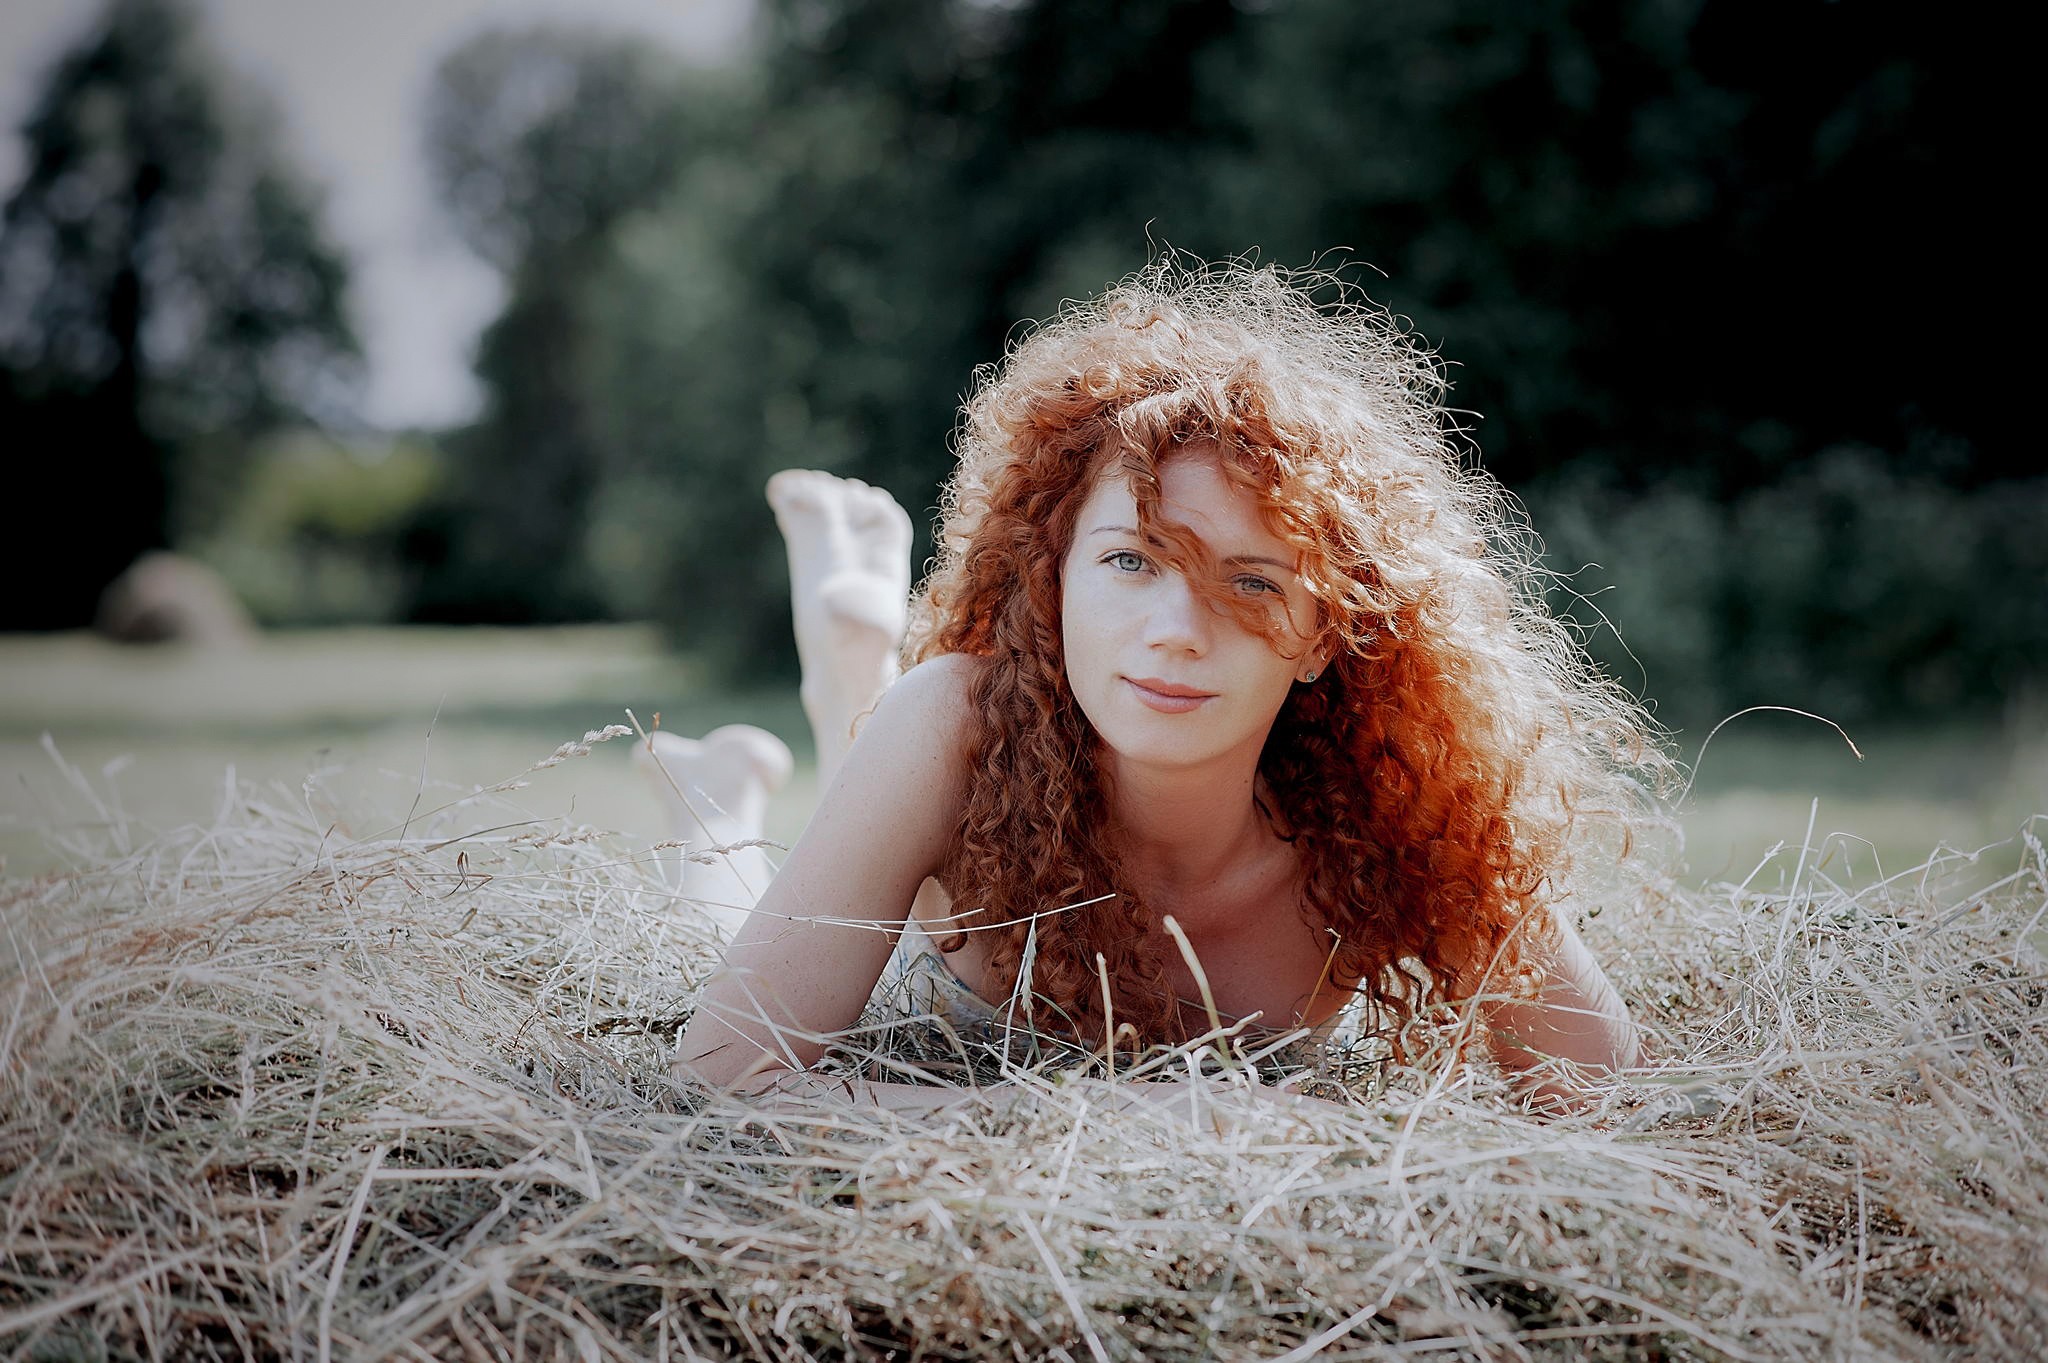 Women Outdoors Model Curly Hair Redhead Straw Barefoot Hair In Face Looking At Viewer 2048x1363